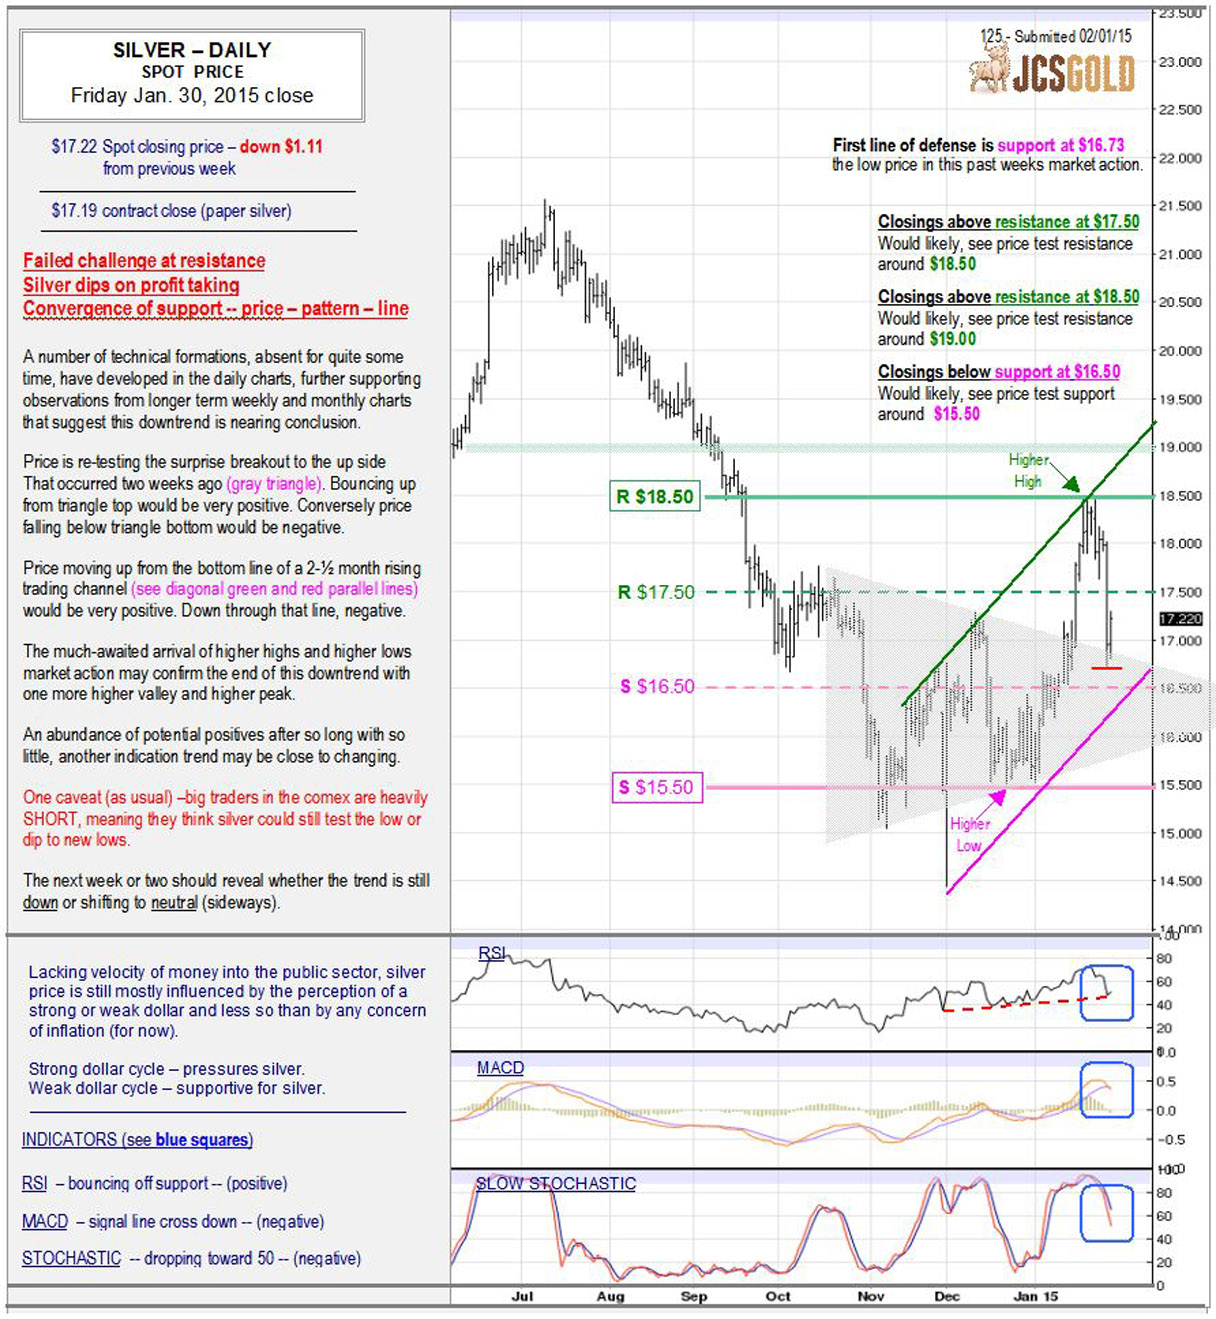 Jan 30, 2015 chart & commentary